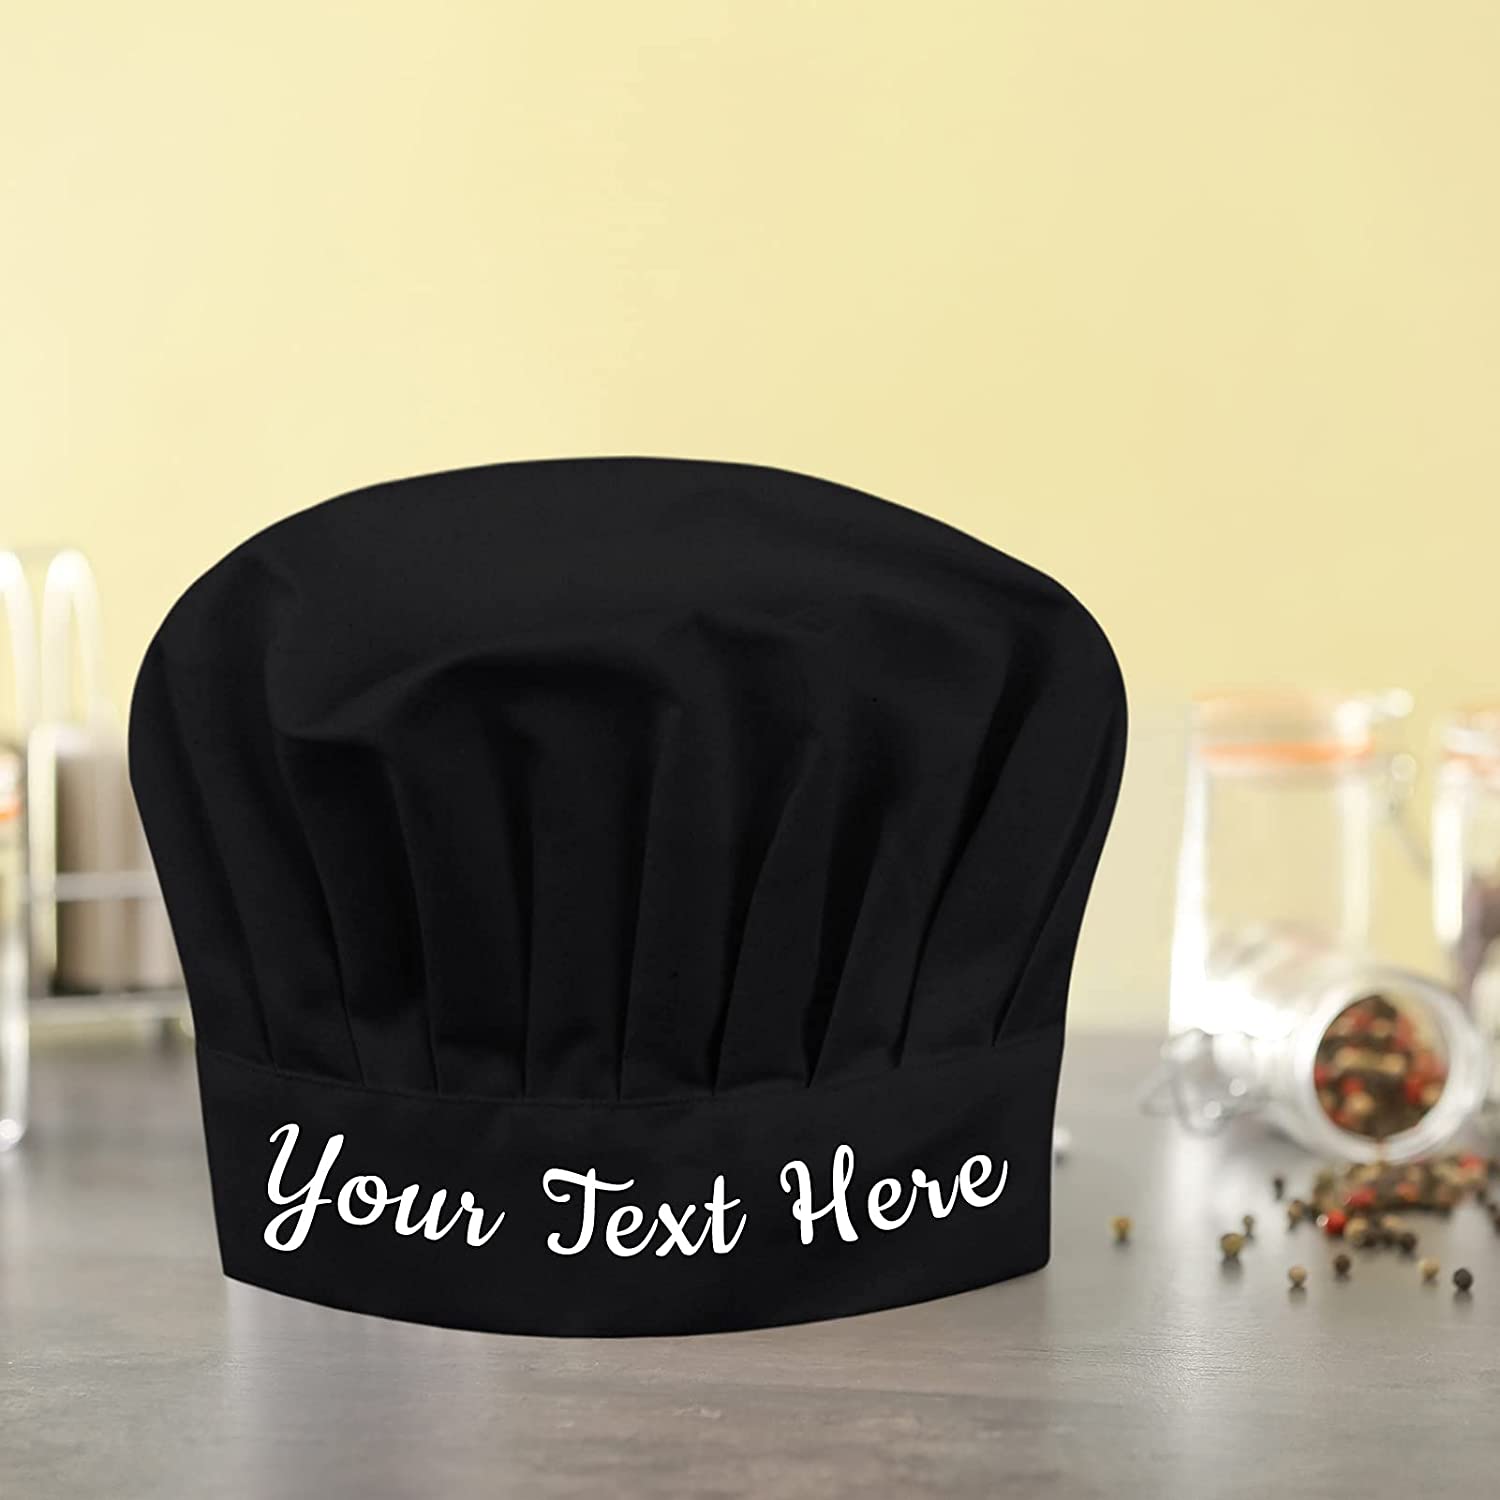 Personalized Chef Hat, Cooking Cap, Adjustable Elastic Kitchen Cooking Hat, Custom Baker Hat with Name(Black)